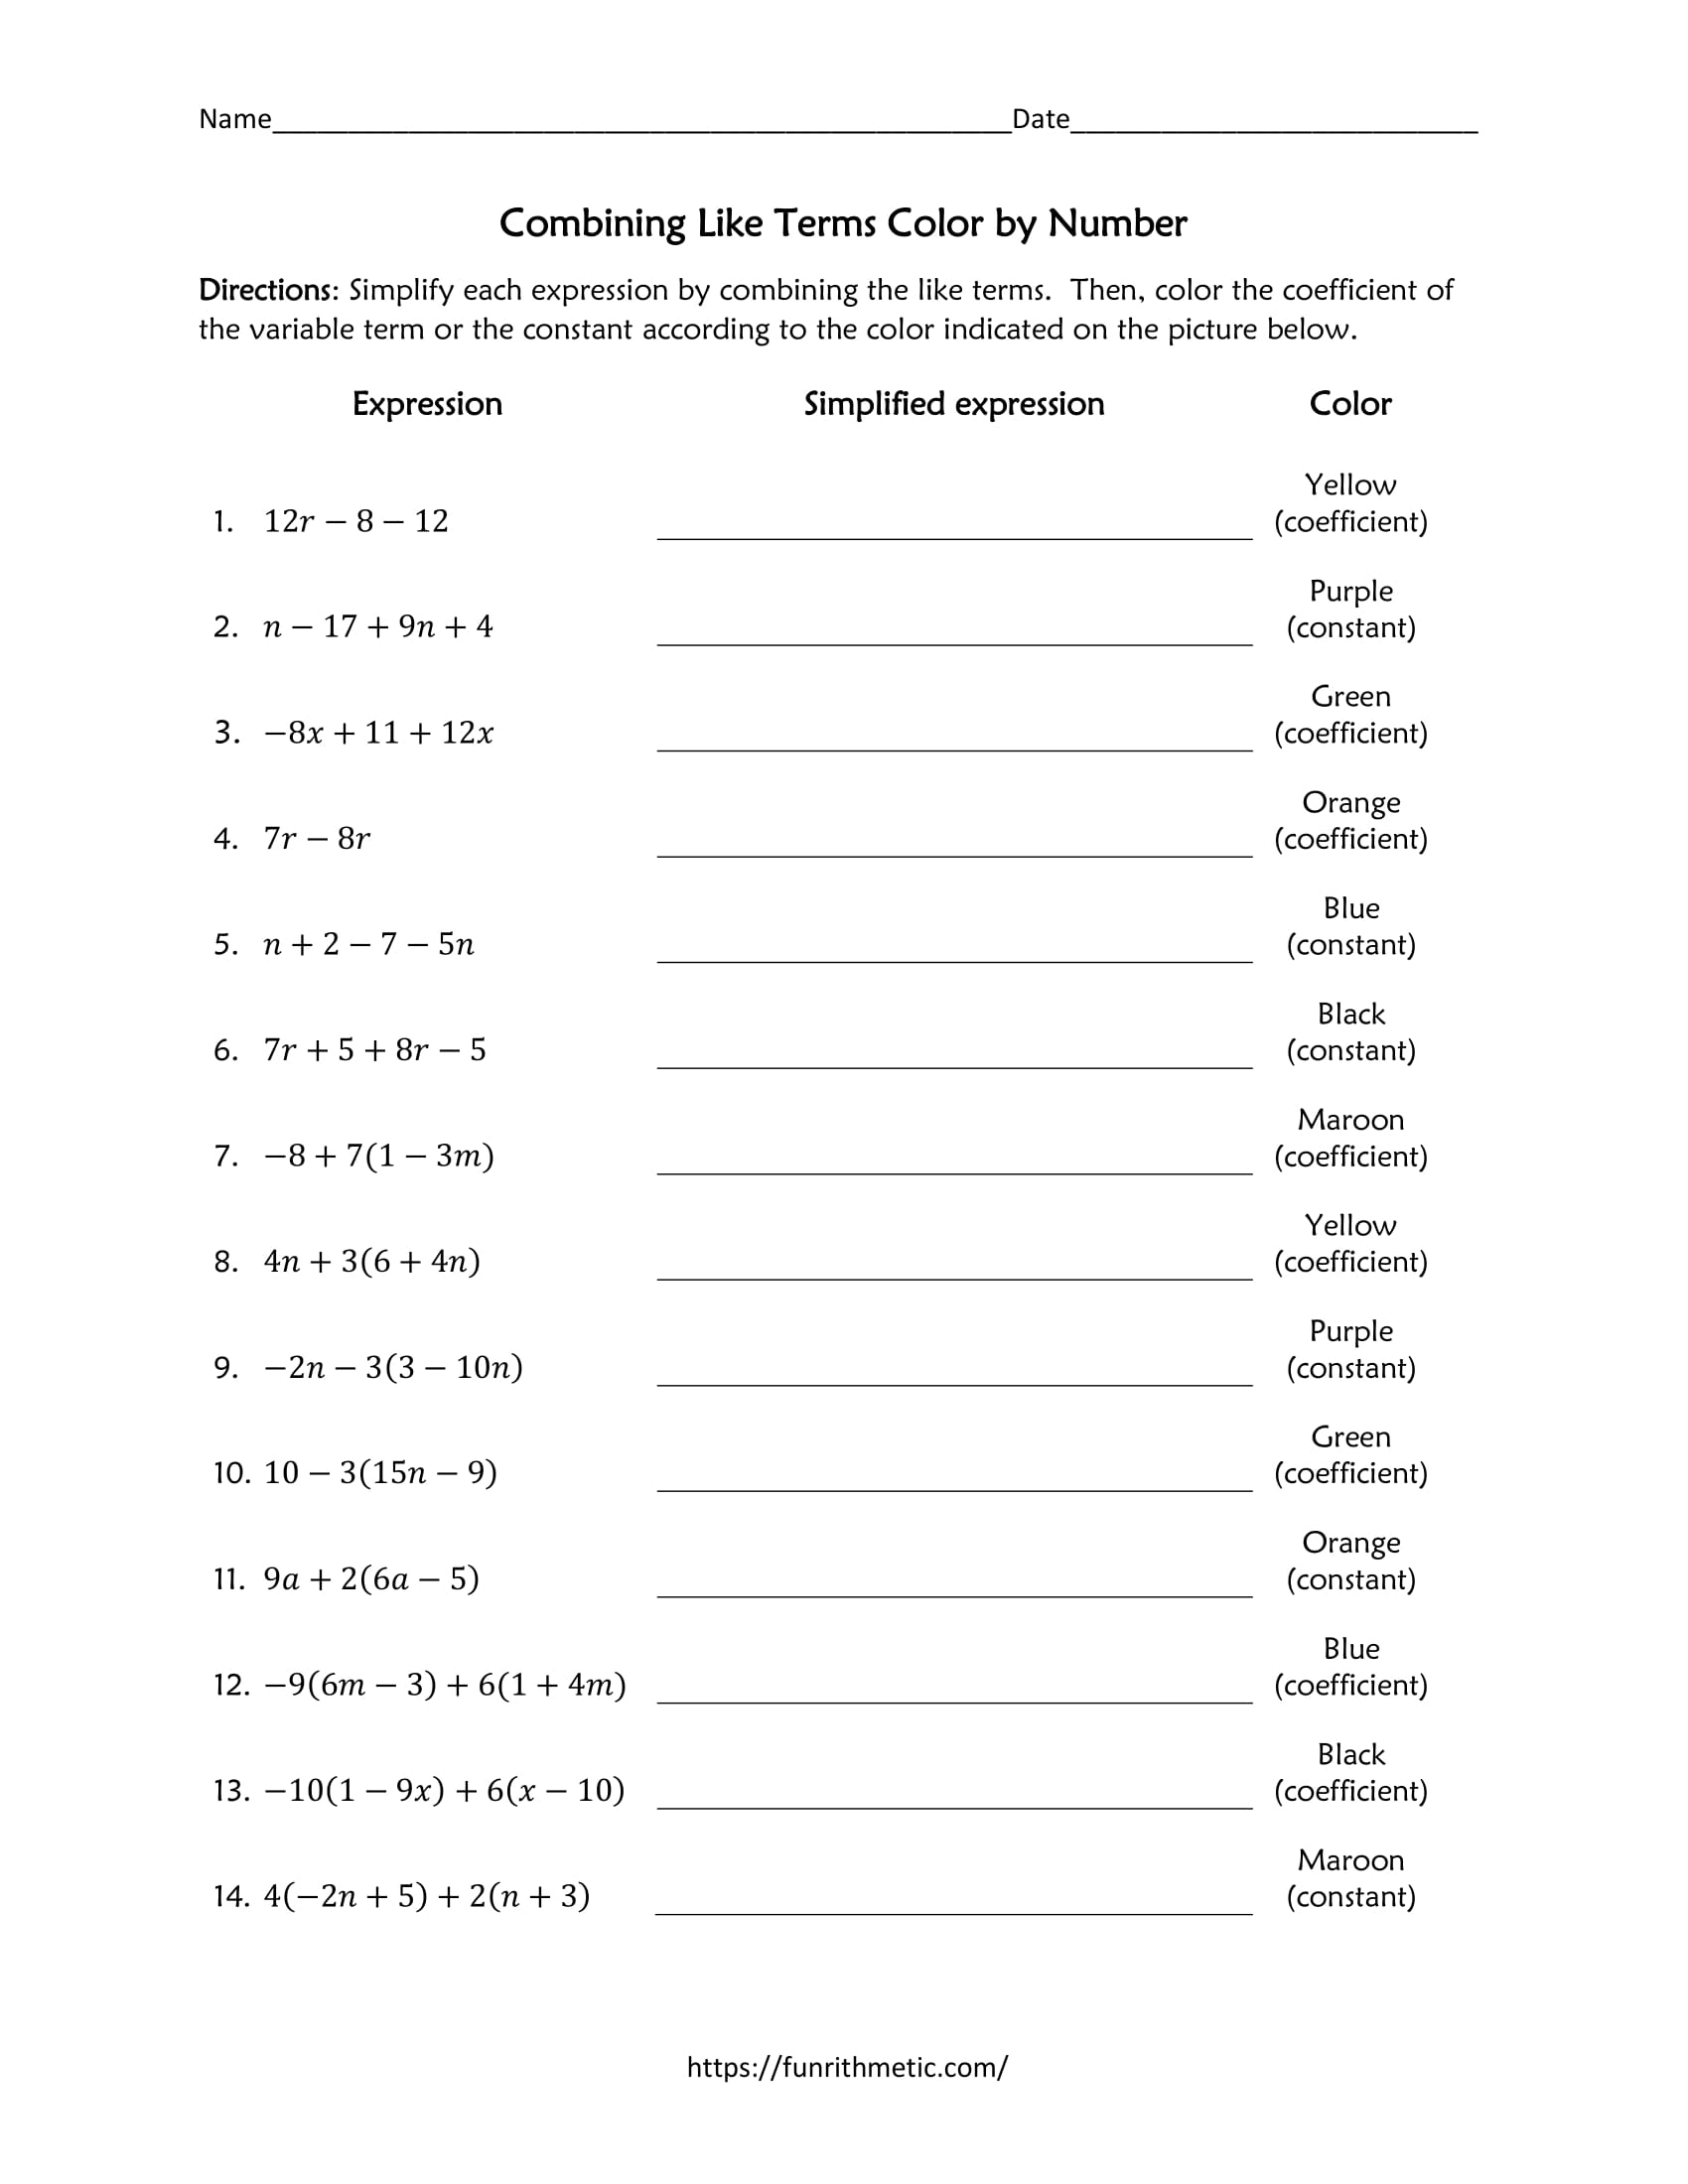 Combining Like Terms Color by Number For Combining Like Terms Equations Worksheet